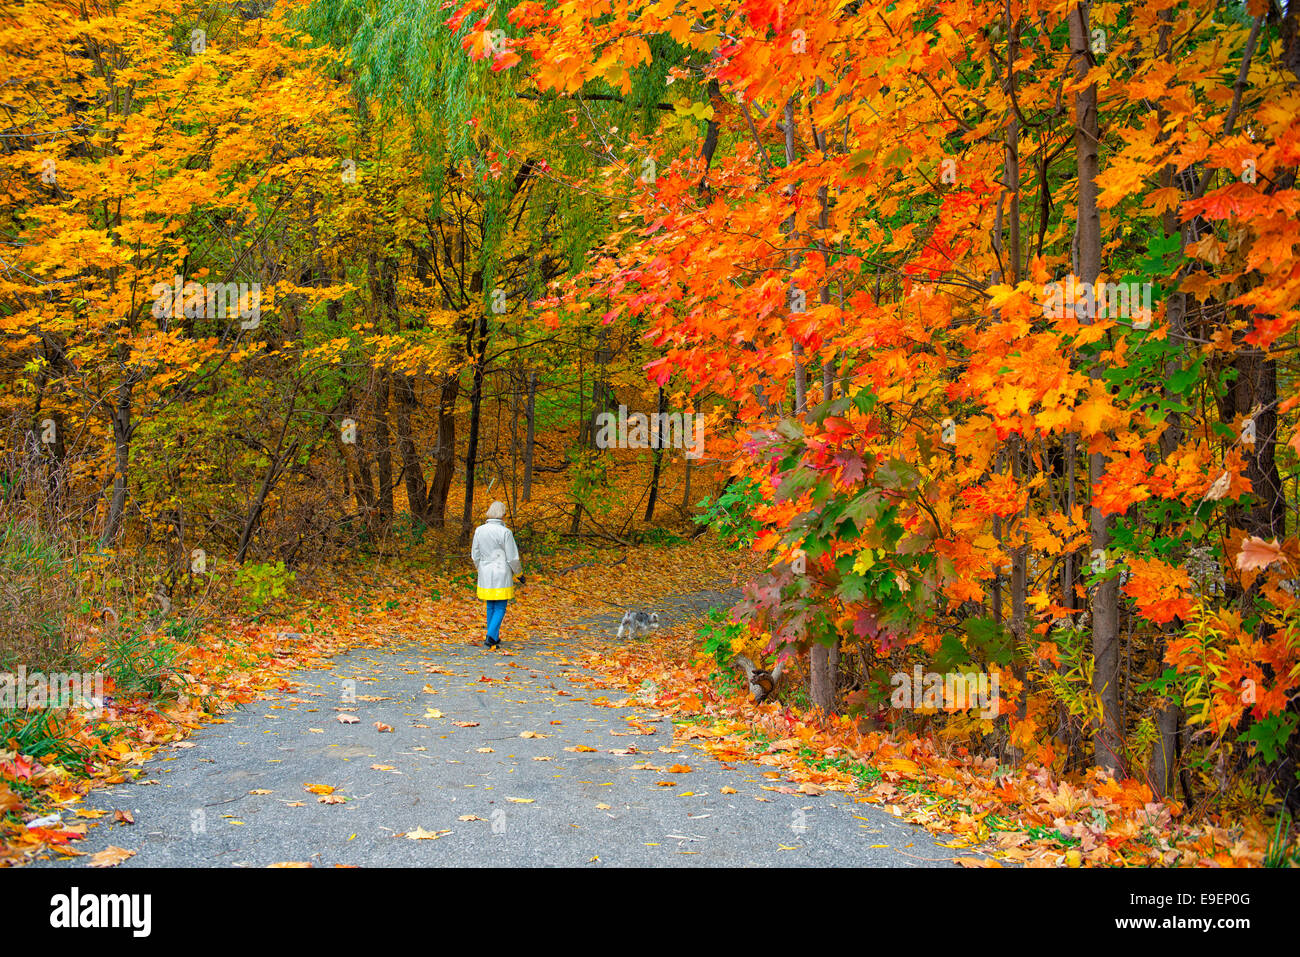 Autumn Fall Colours Colors Trees and Leaves, Woman Walking Dog in Park Stock Photo